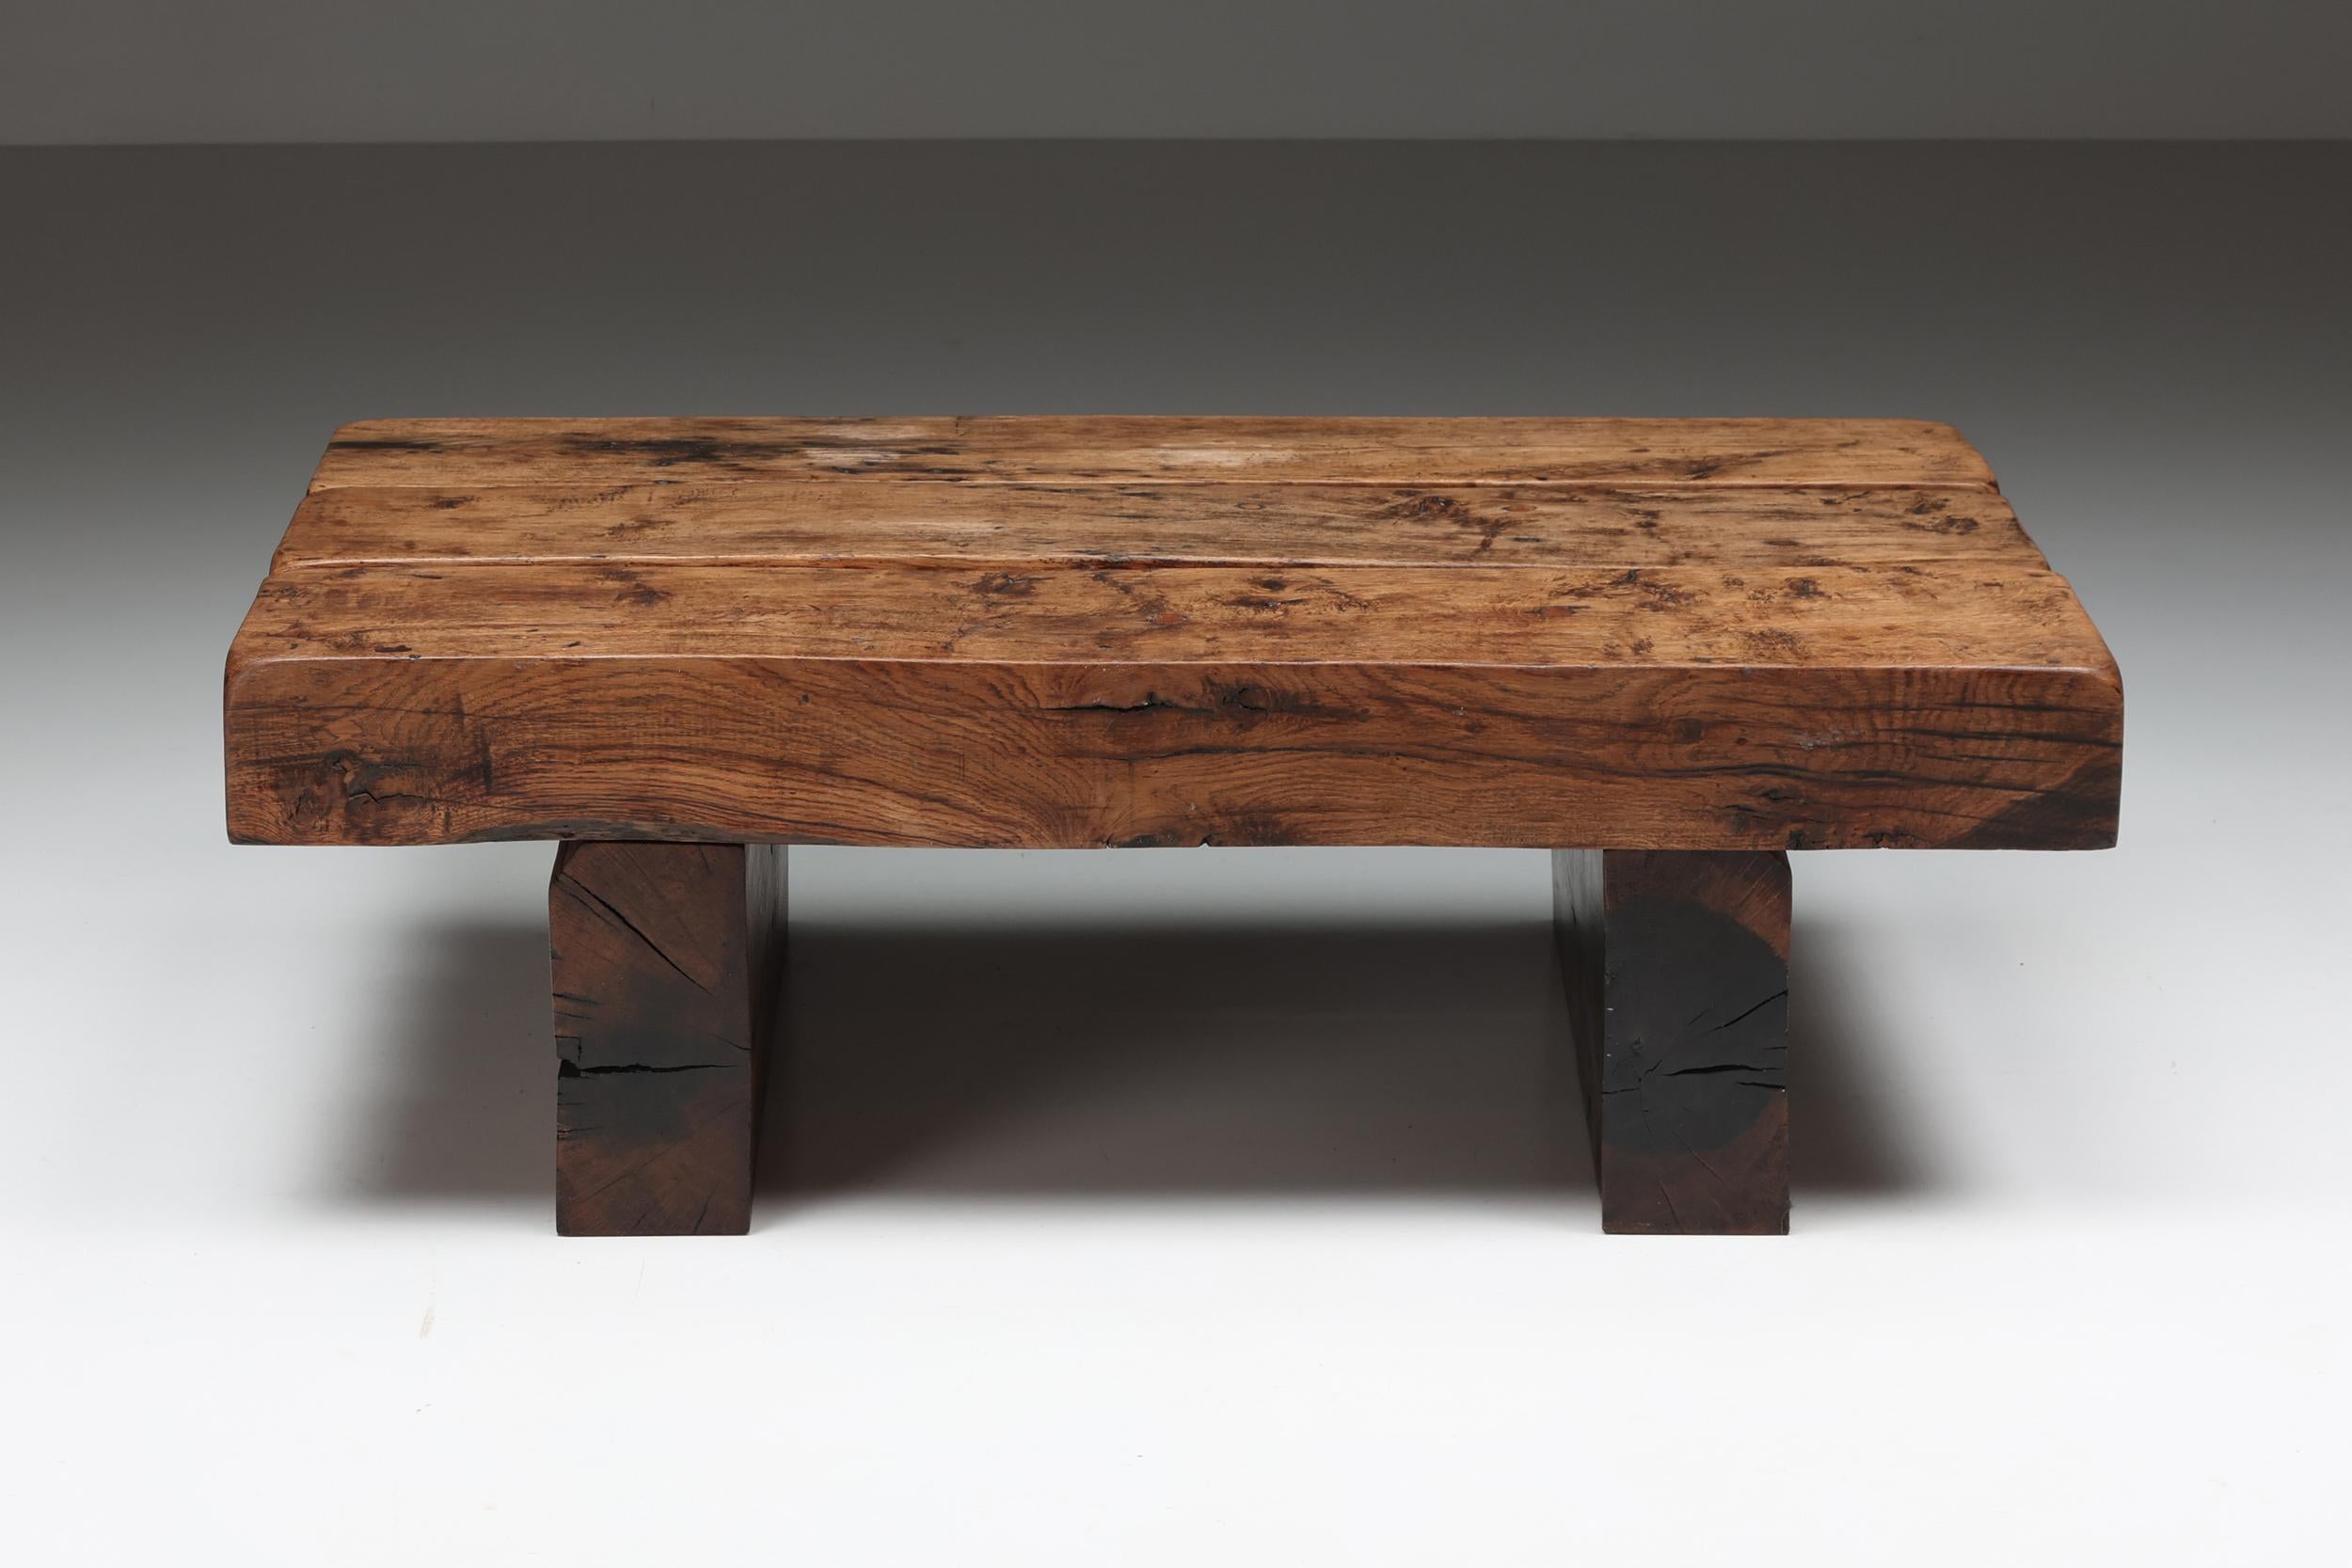 Rectangle rustic wood coffee table, France, Wabi-sabi Insp, 1950's

Rustic rectangular coffee table in solid wood made in France in the 1950s. The remarkable charismatic patina brings warmth to any interior in need of a rustic touch.

